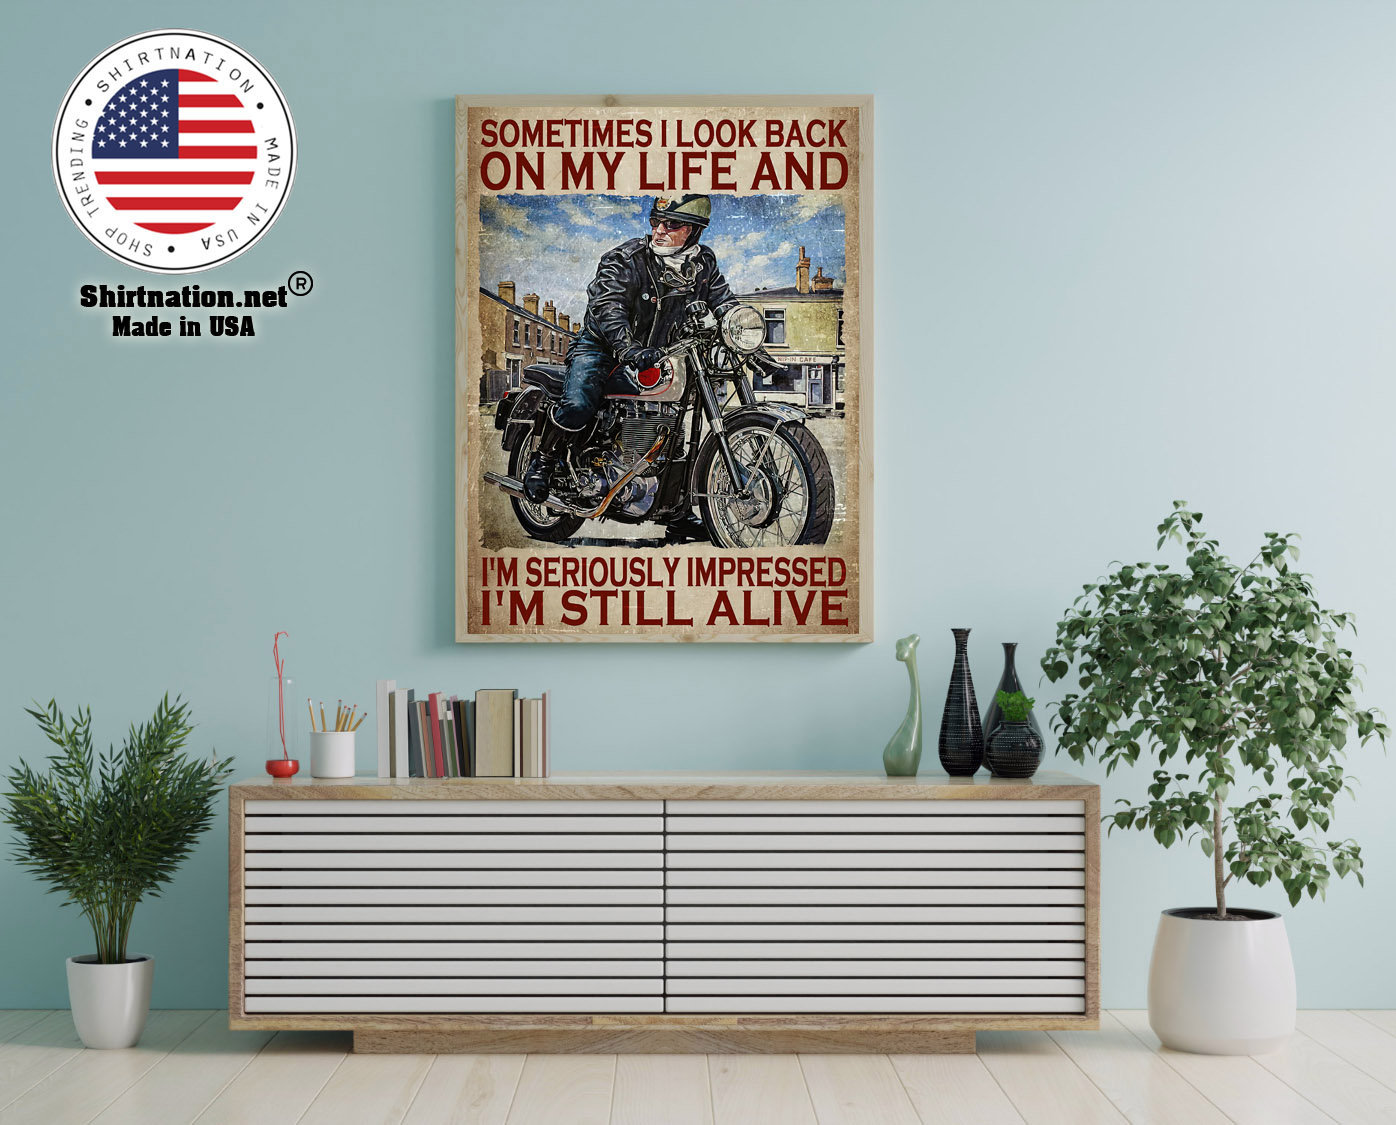 Motorcycles man Sometimes I look back on my life and Im seriously impressed Im still alive poster 12